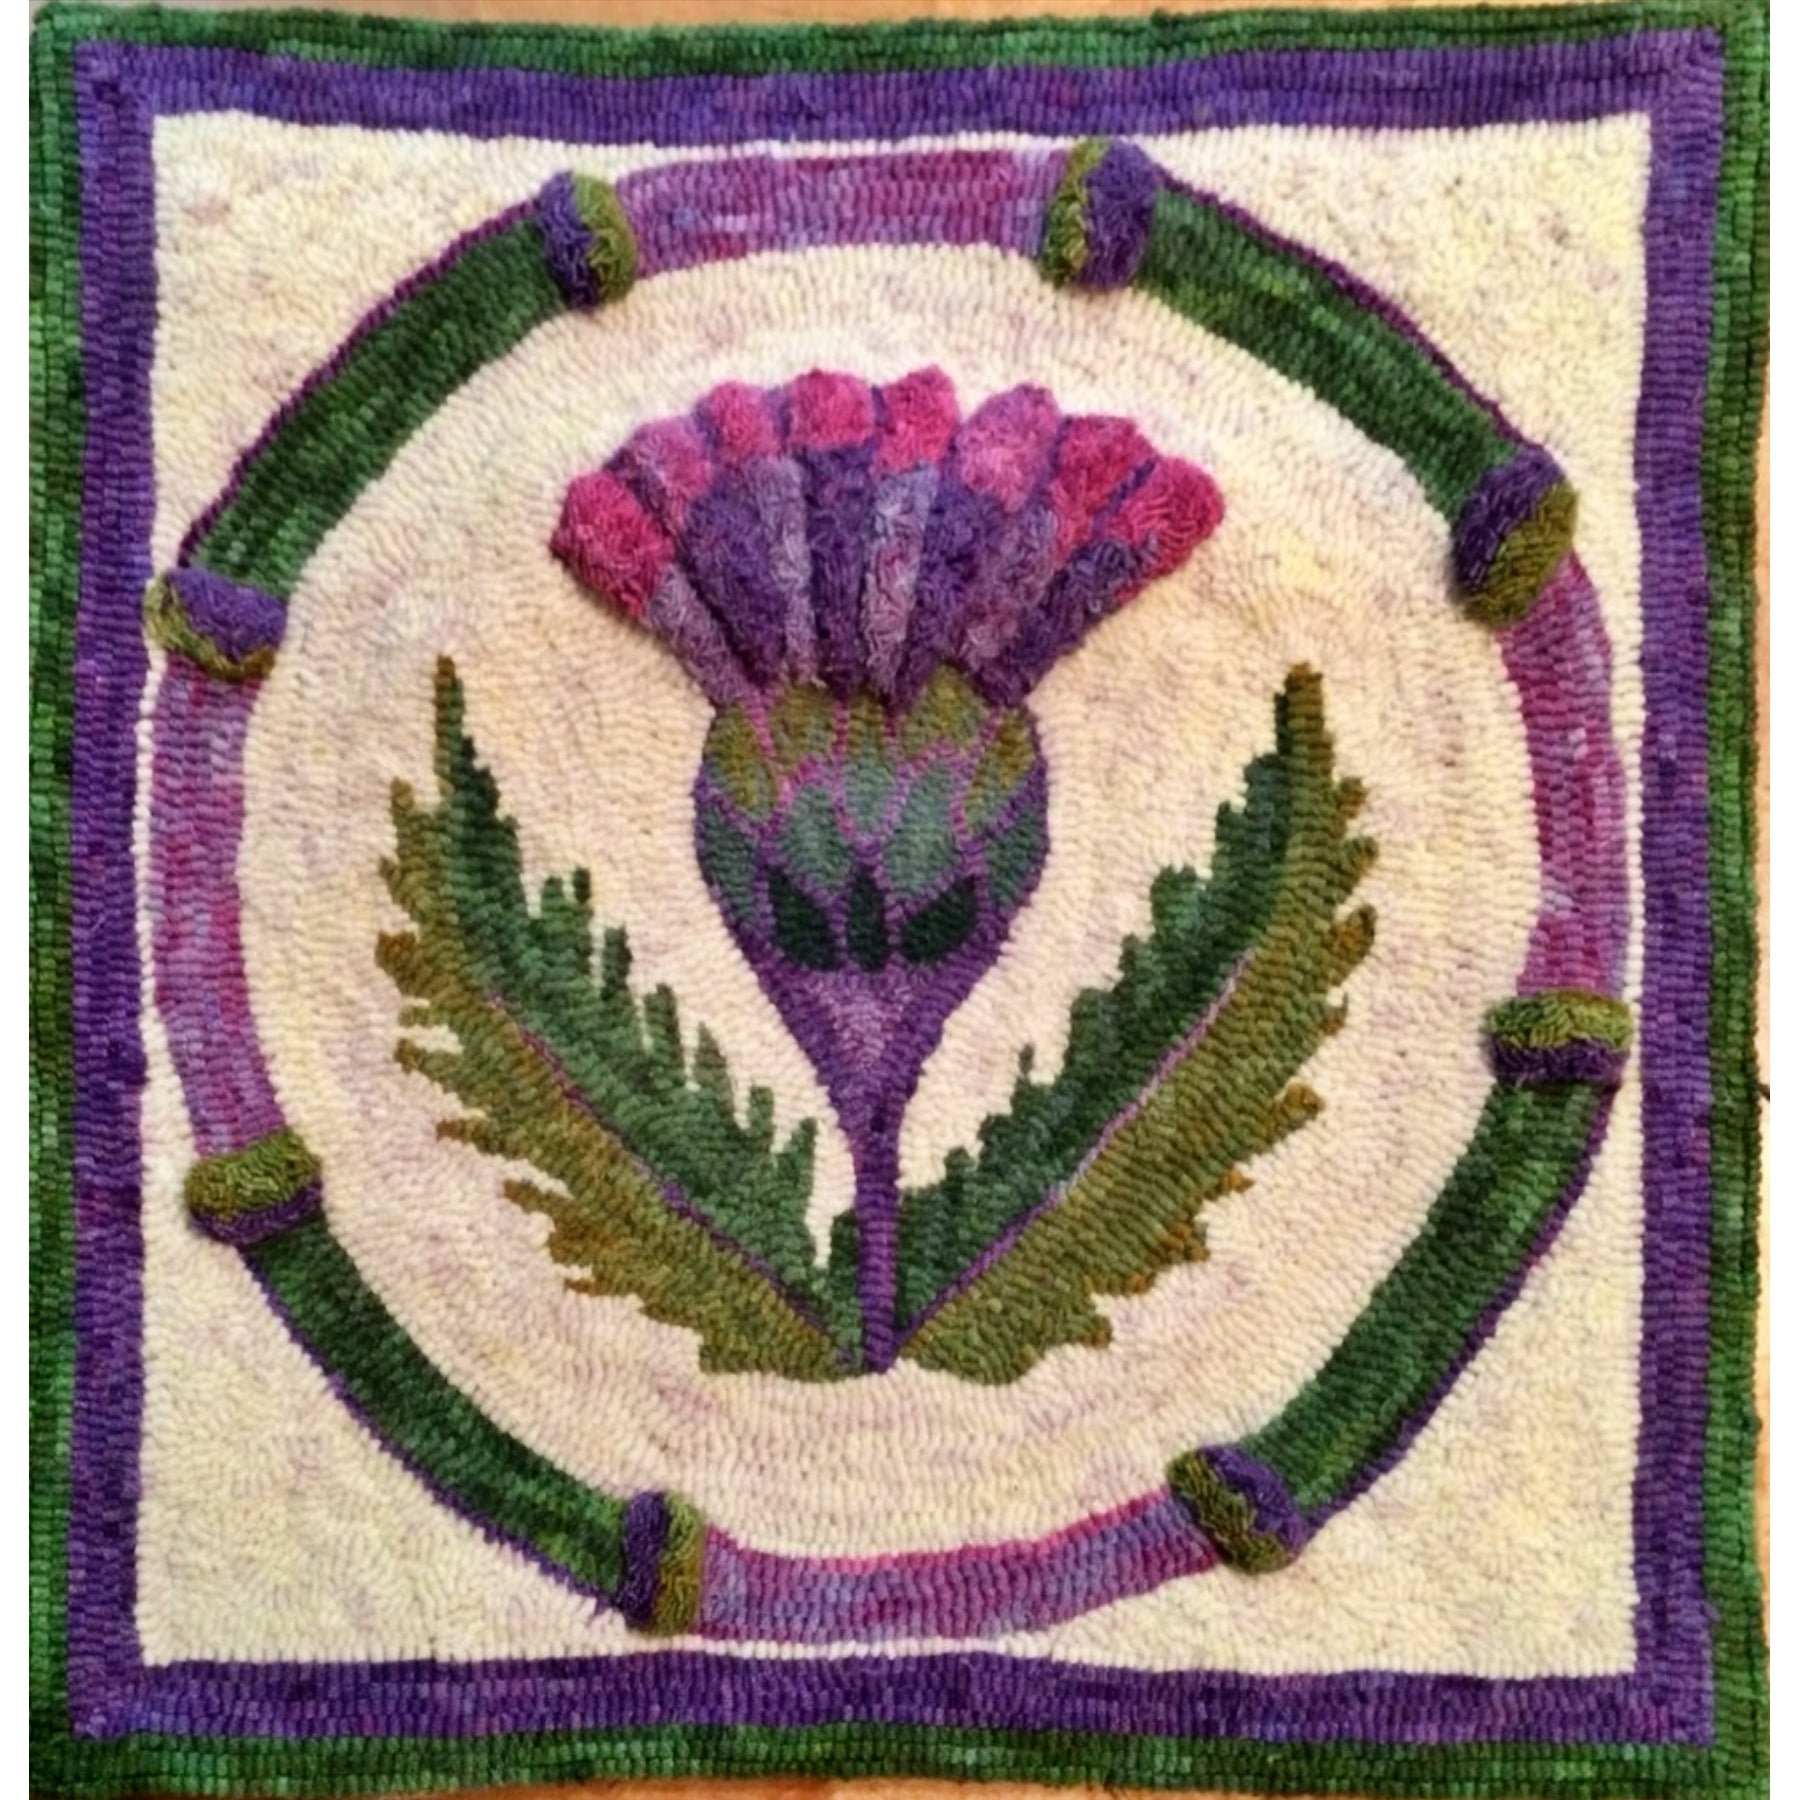 Buttermolds, rug hooked by Carol Murphy